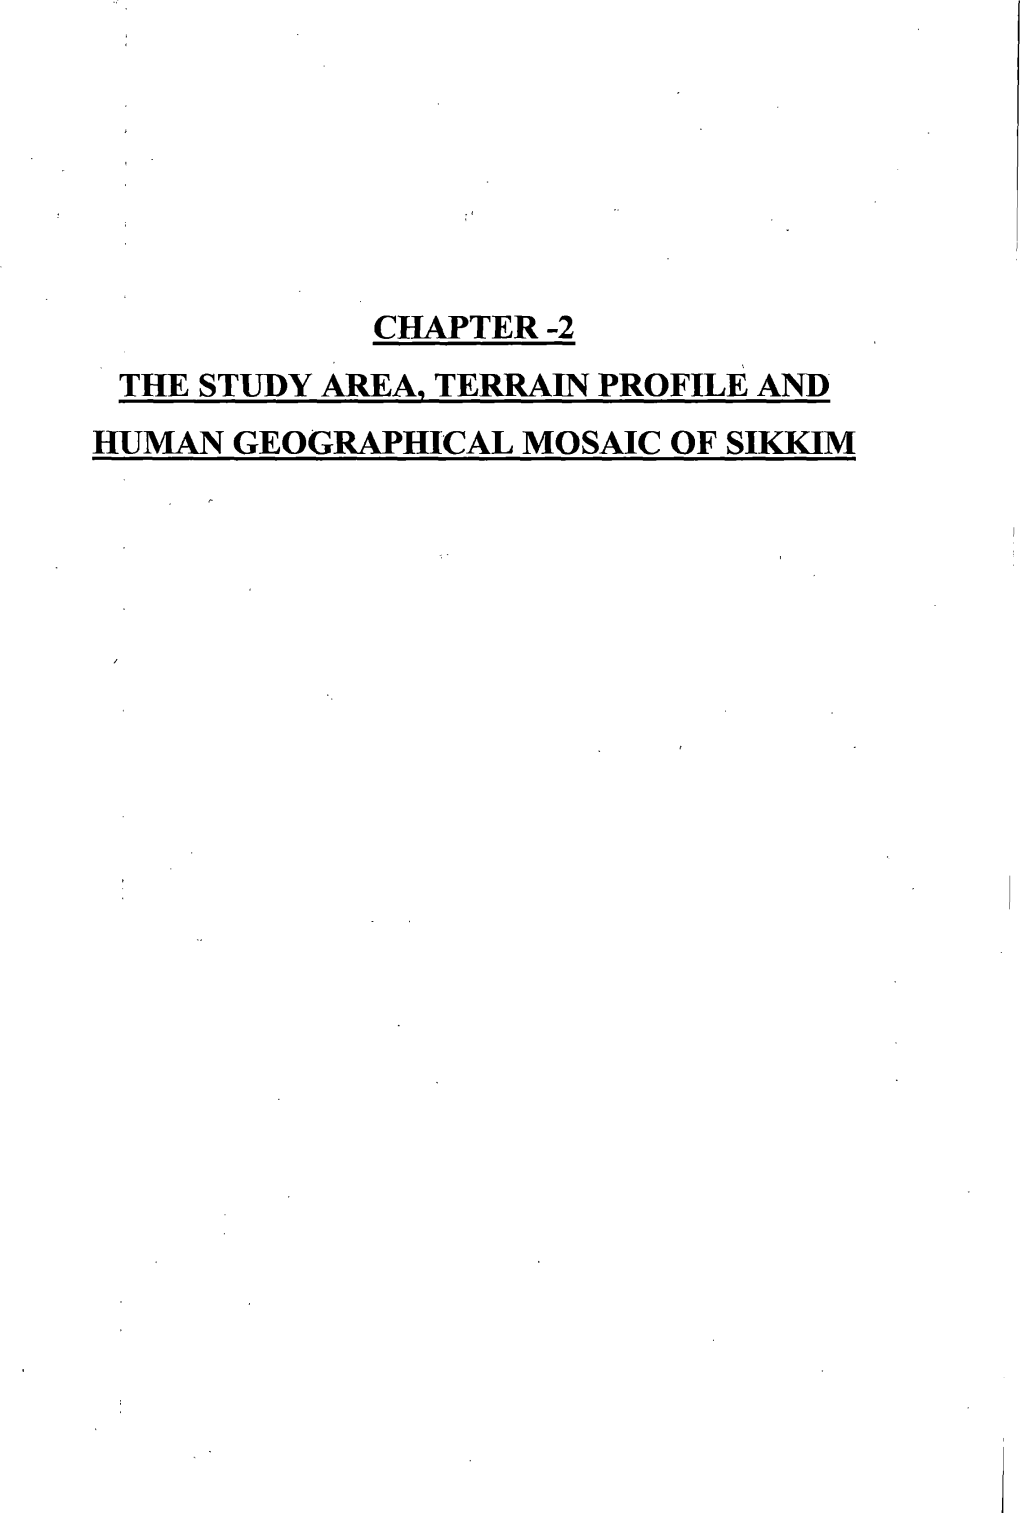 Chapter-2 the Study Area, Terrain Profile and Human Geographical Mosaic of Sikkim 47